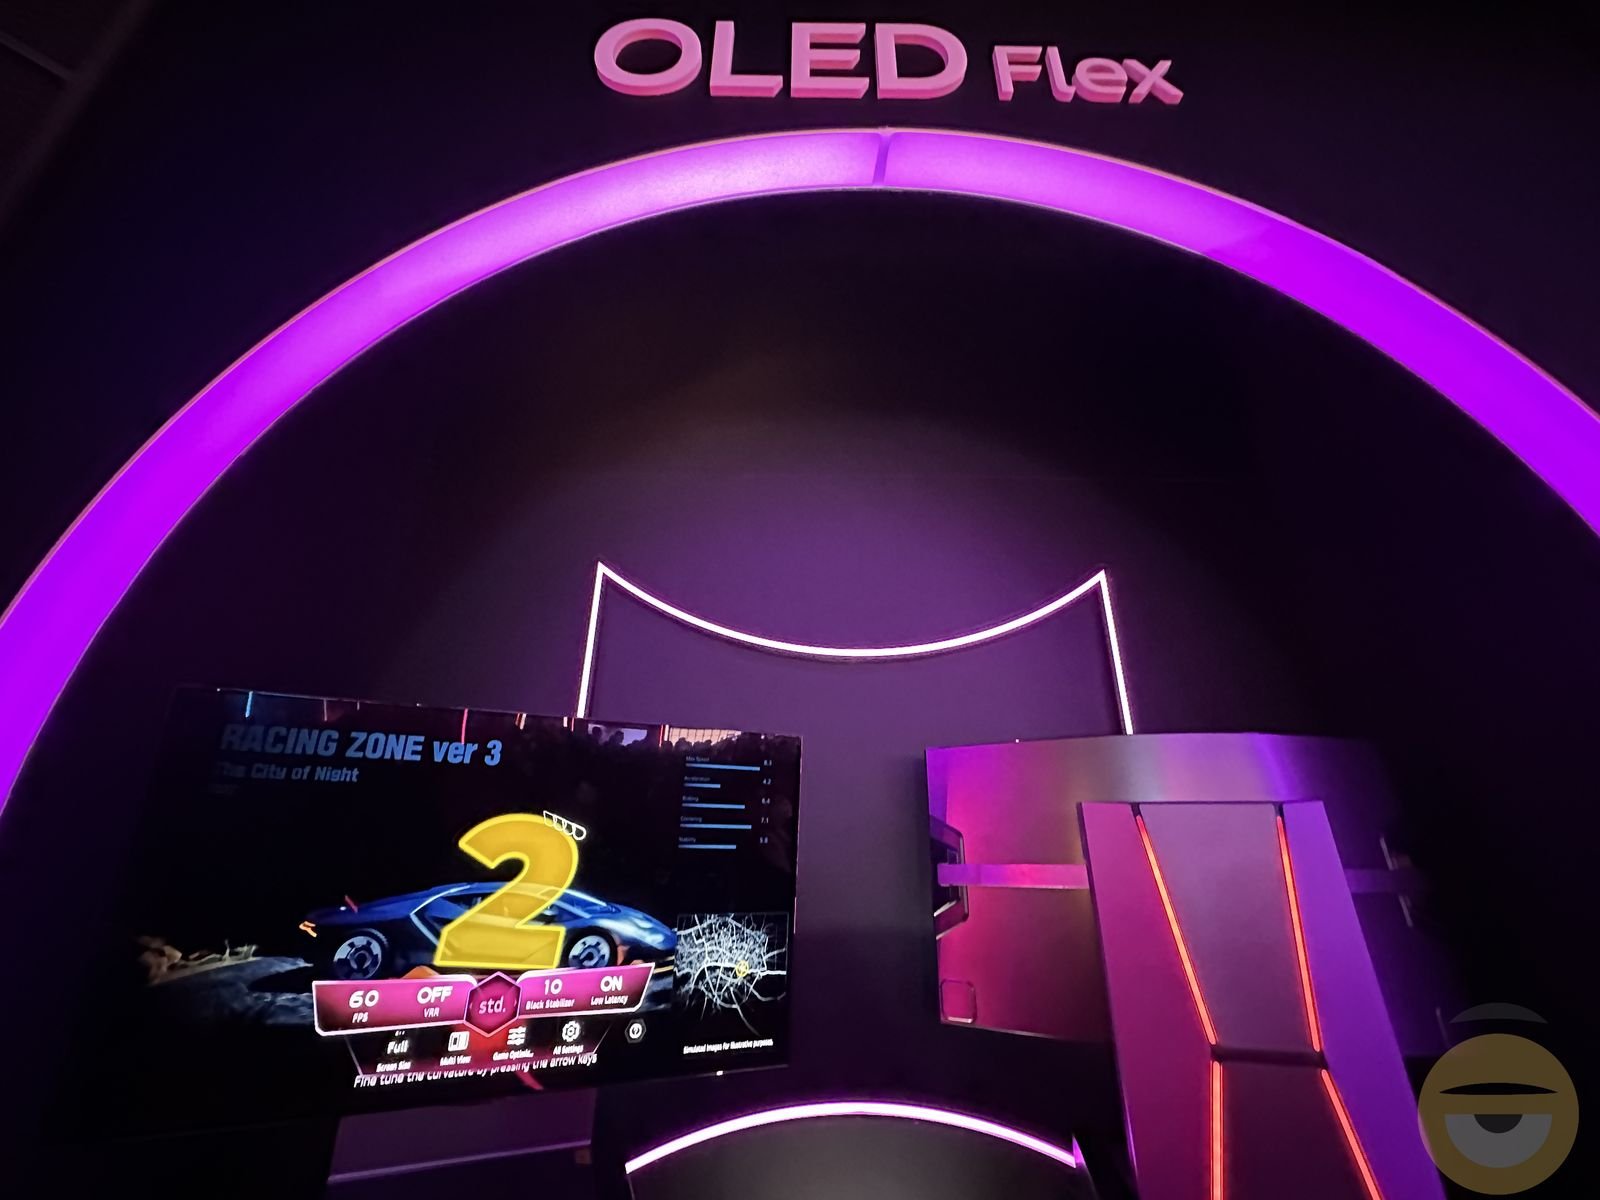 LG OLED Flex: The Ultimate “Want” at CES 2023 – LG